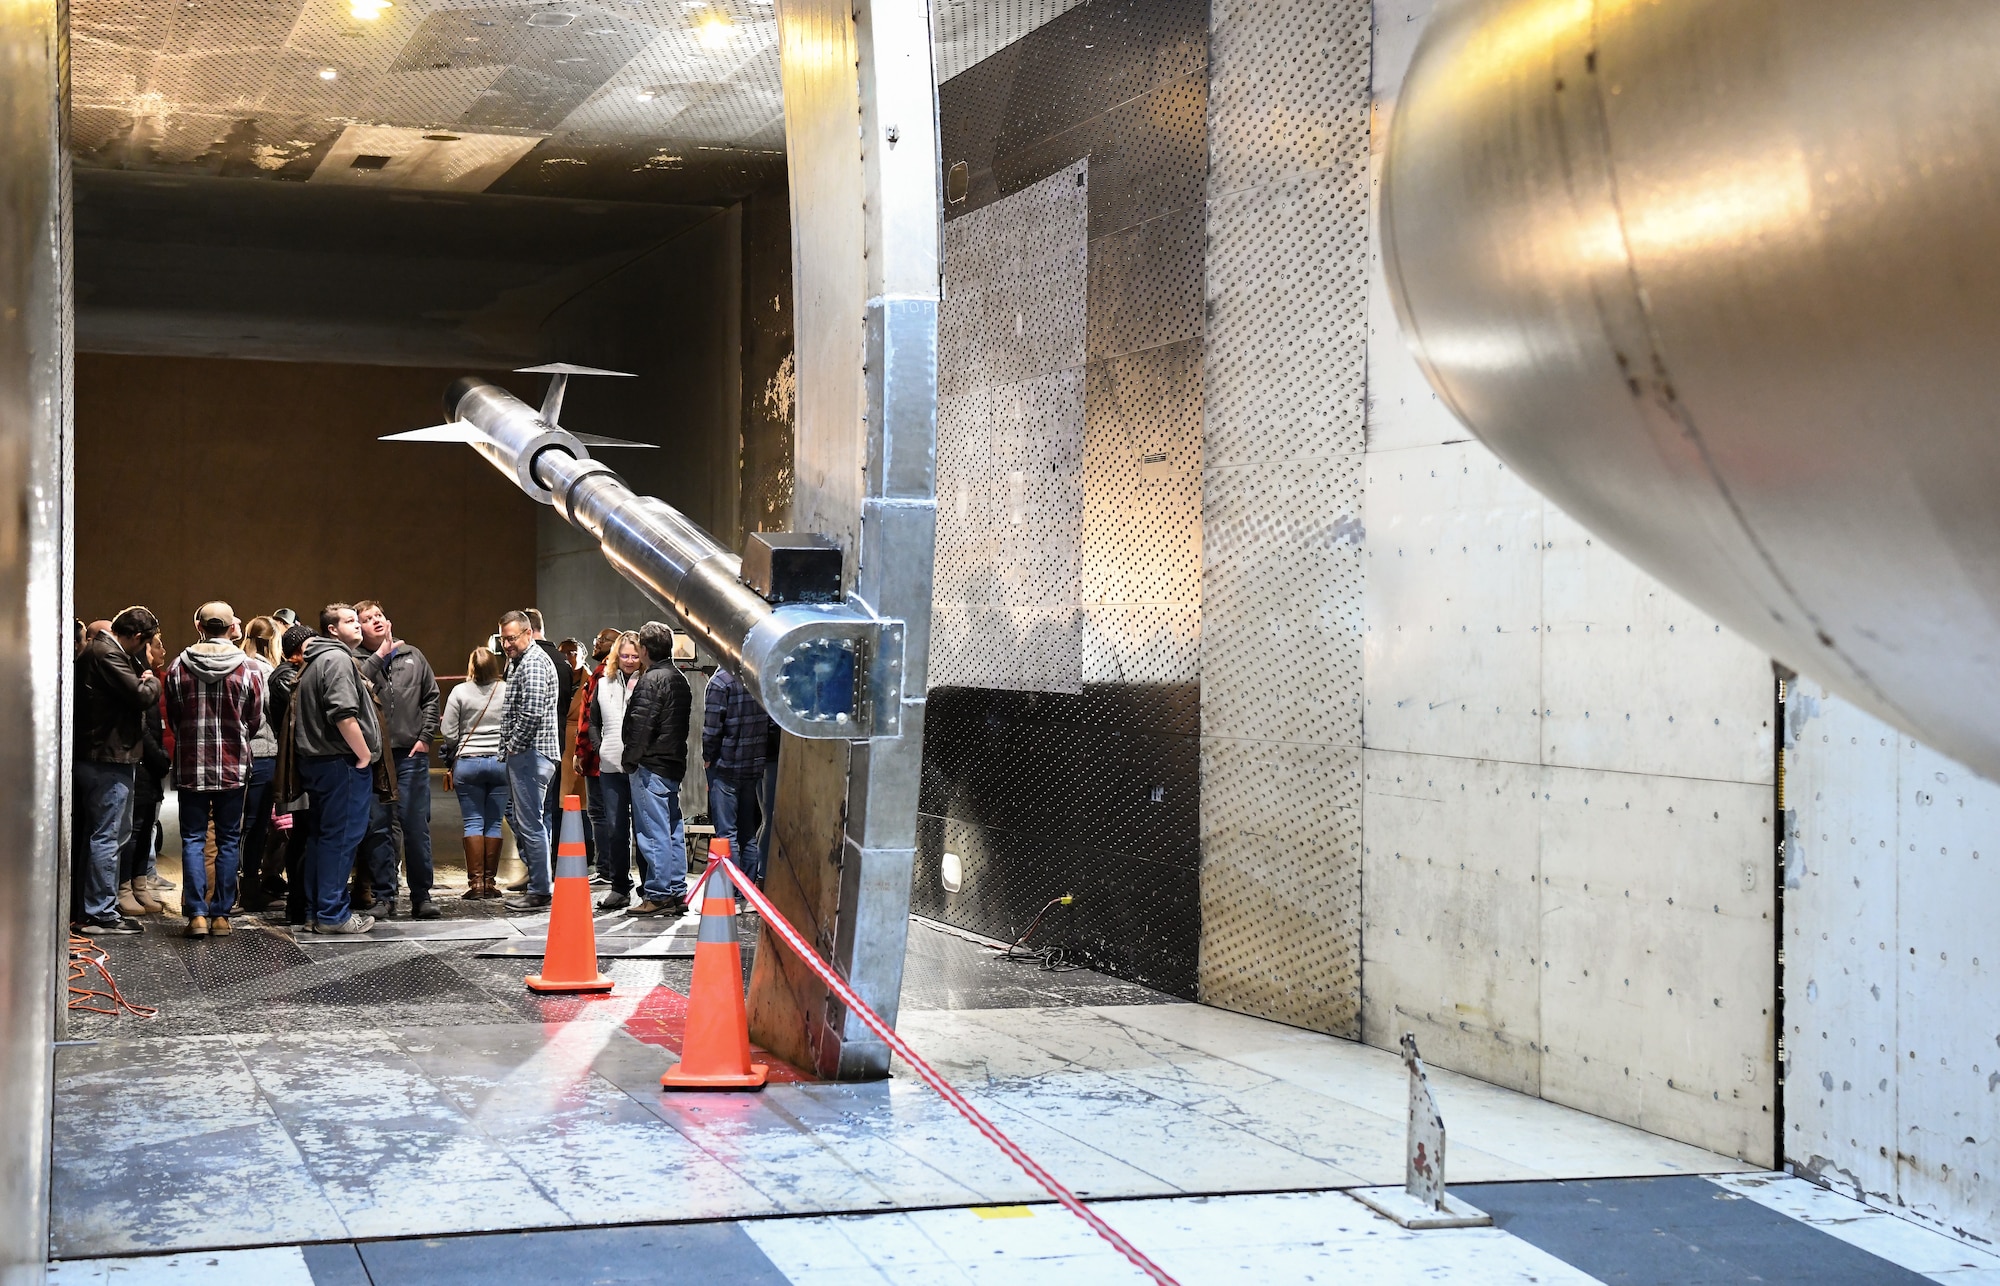 Group of people in a wind tunnel